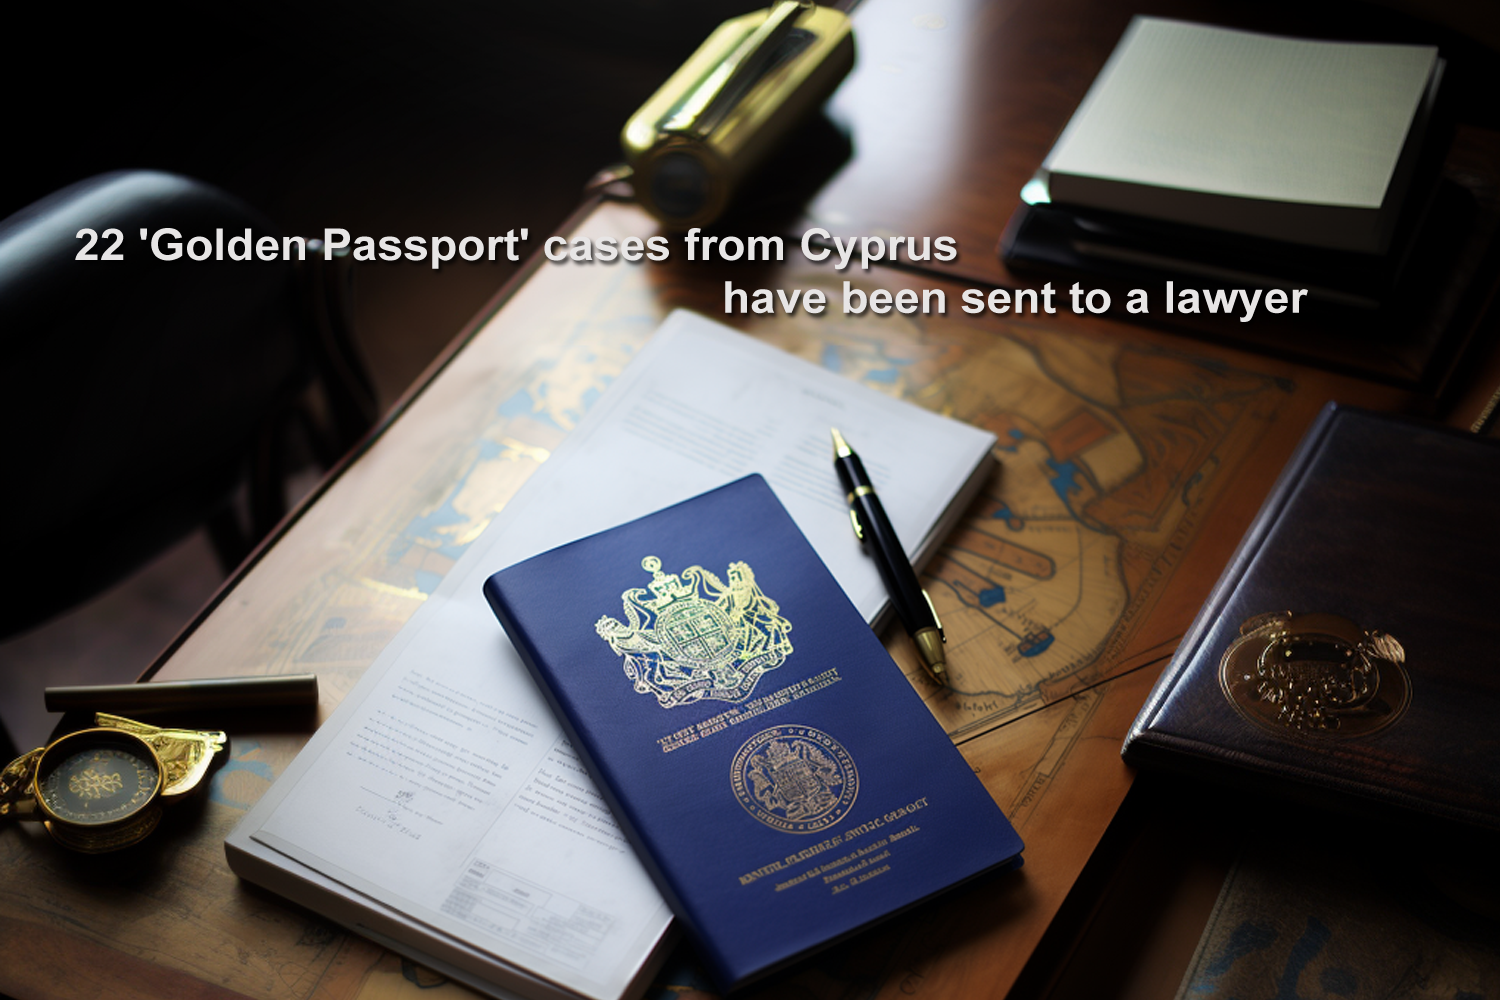 22 'Golden Passport' cases from Cyprus have been sent to a lawyer.